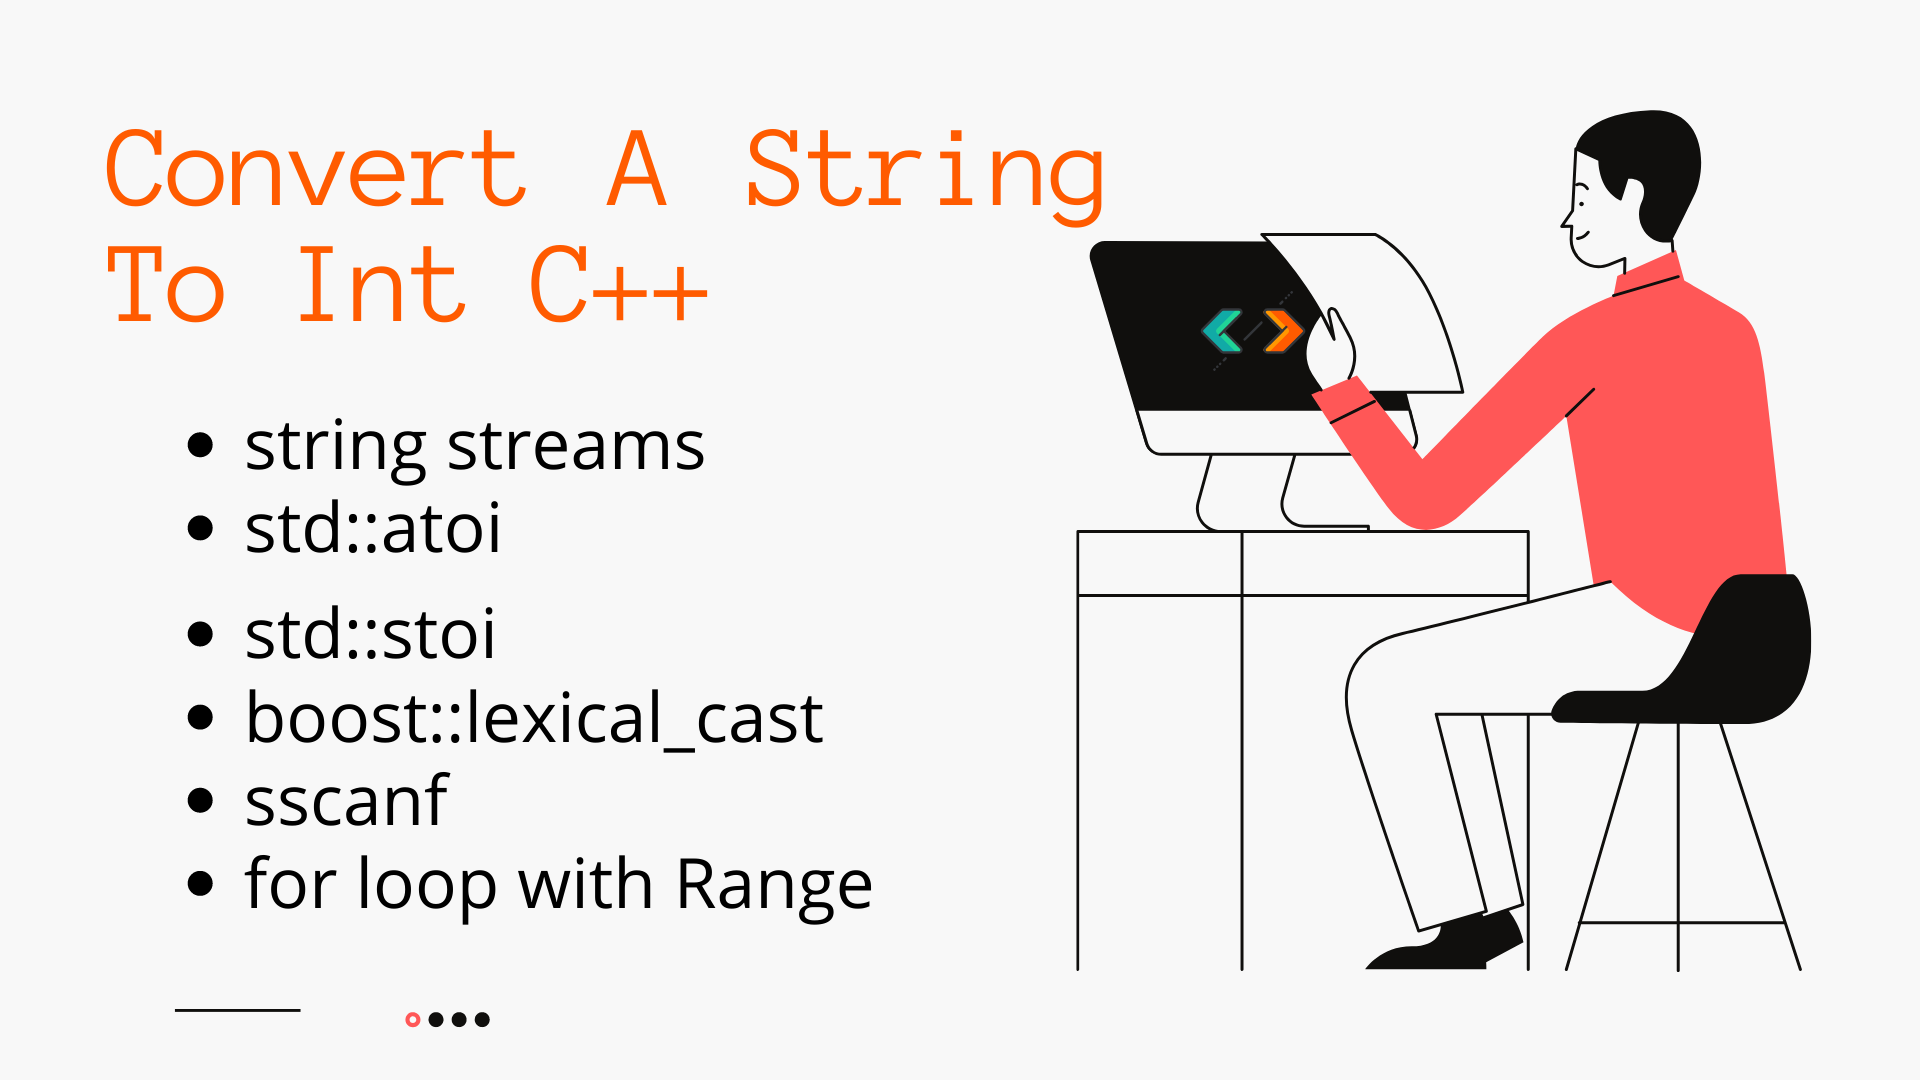 Convert A String To Int C++